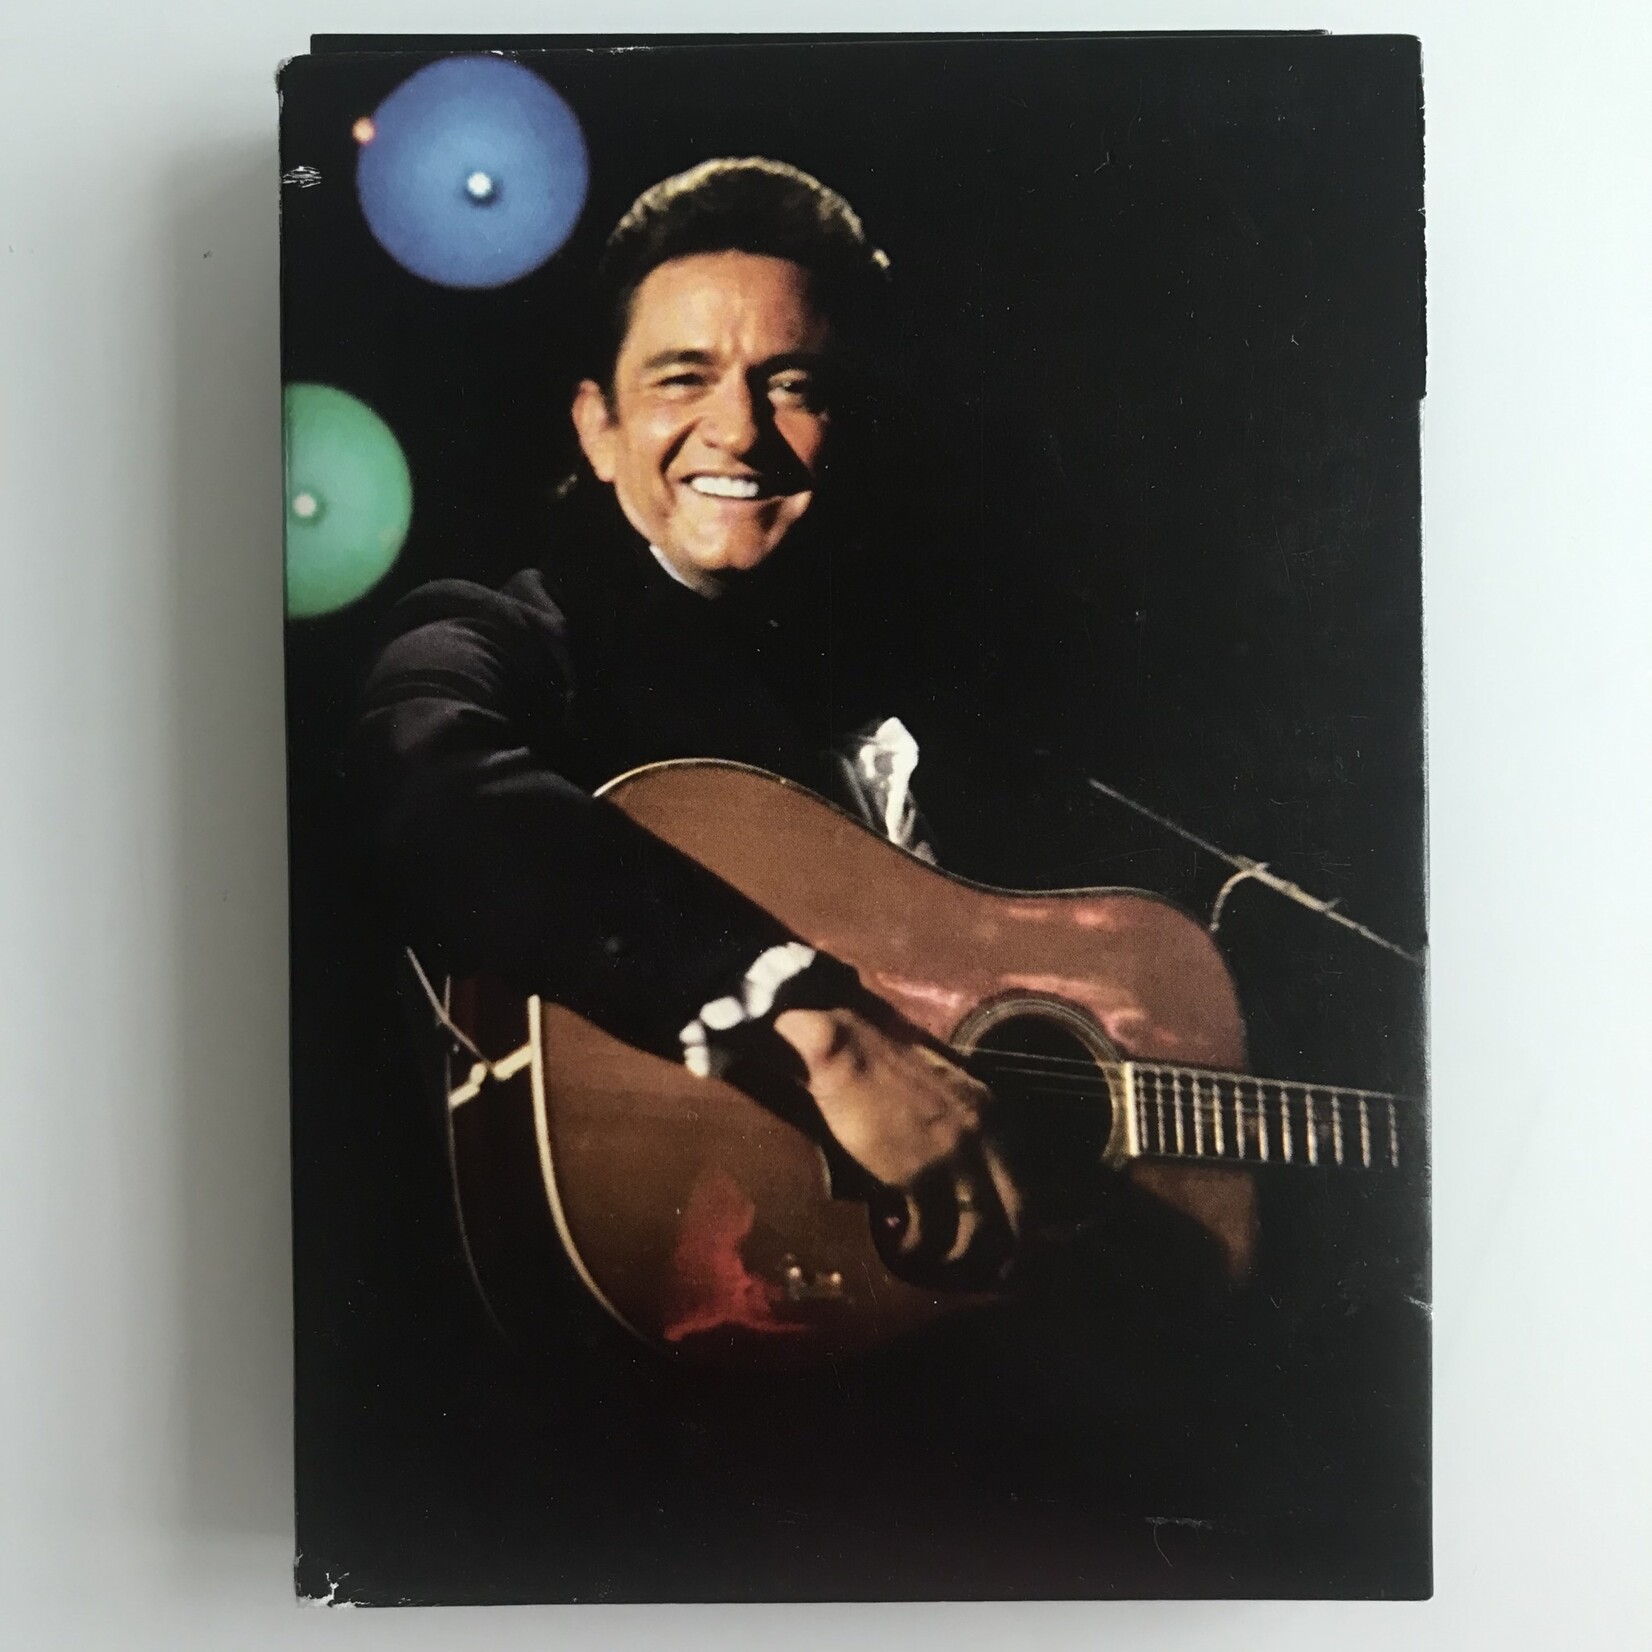 Johnny Cash - The Best Of The Johnny Cash TV Show - DVD (USED)